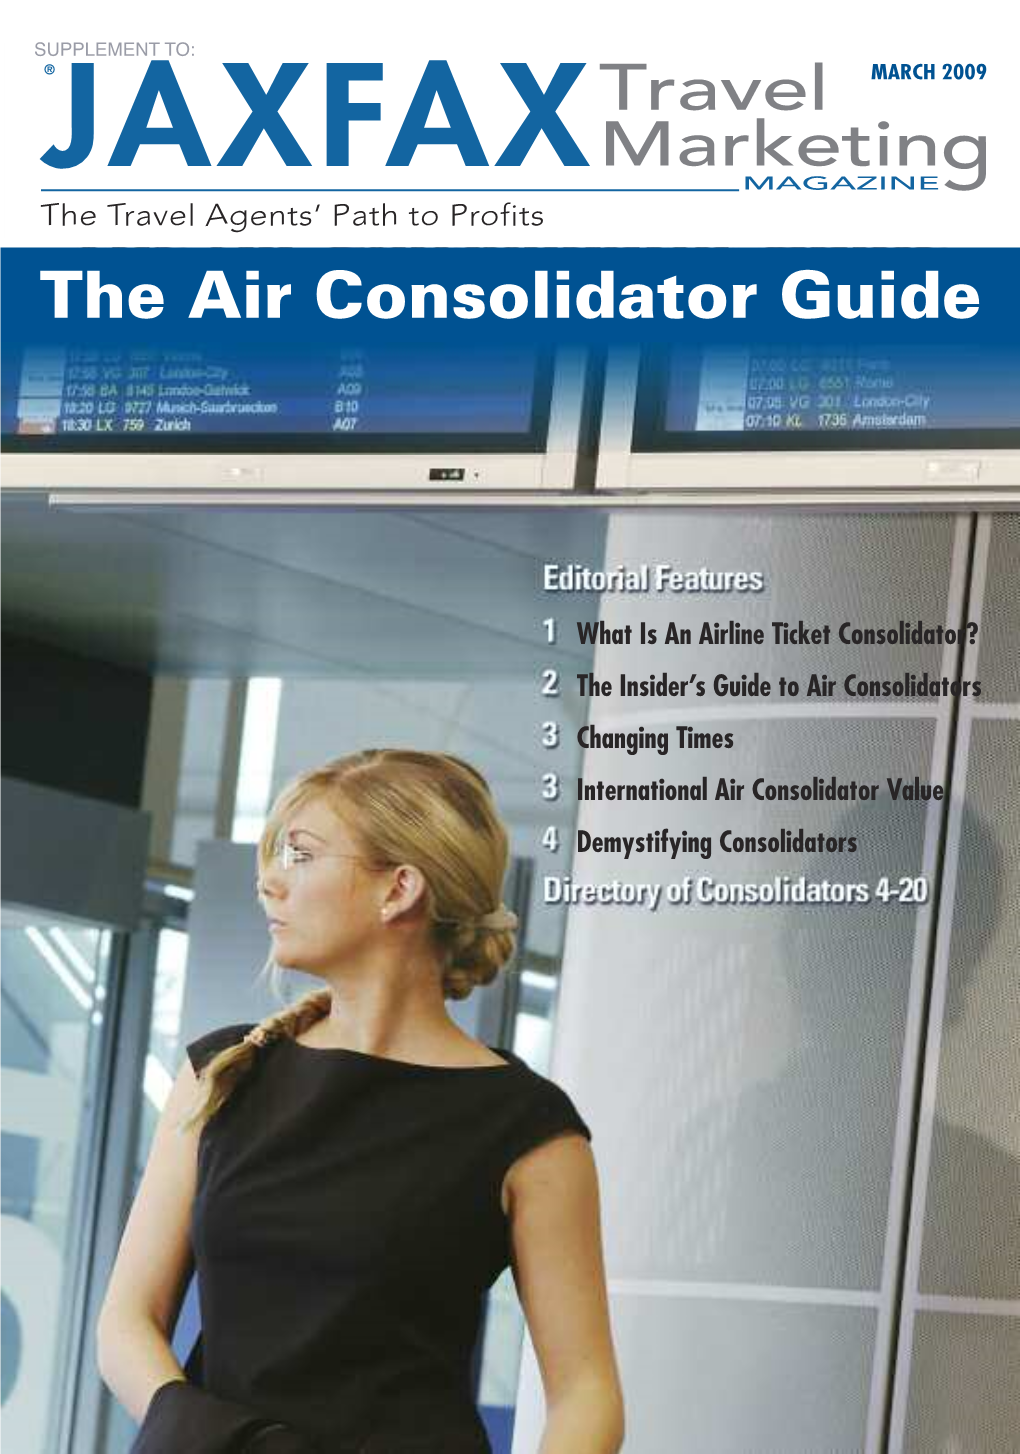 The Air Consolidator Guide